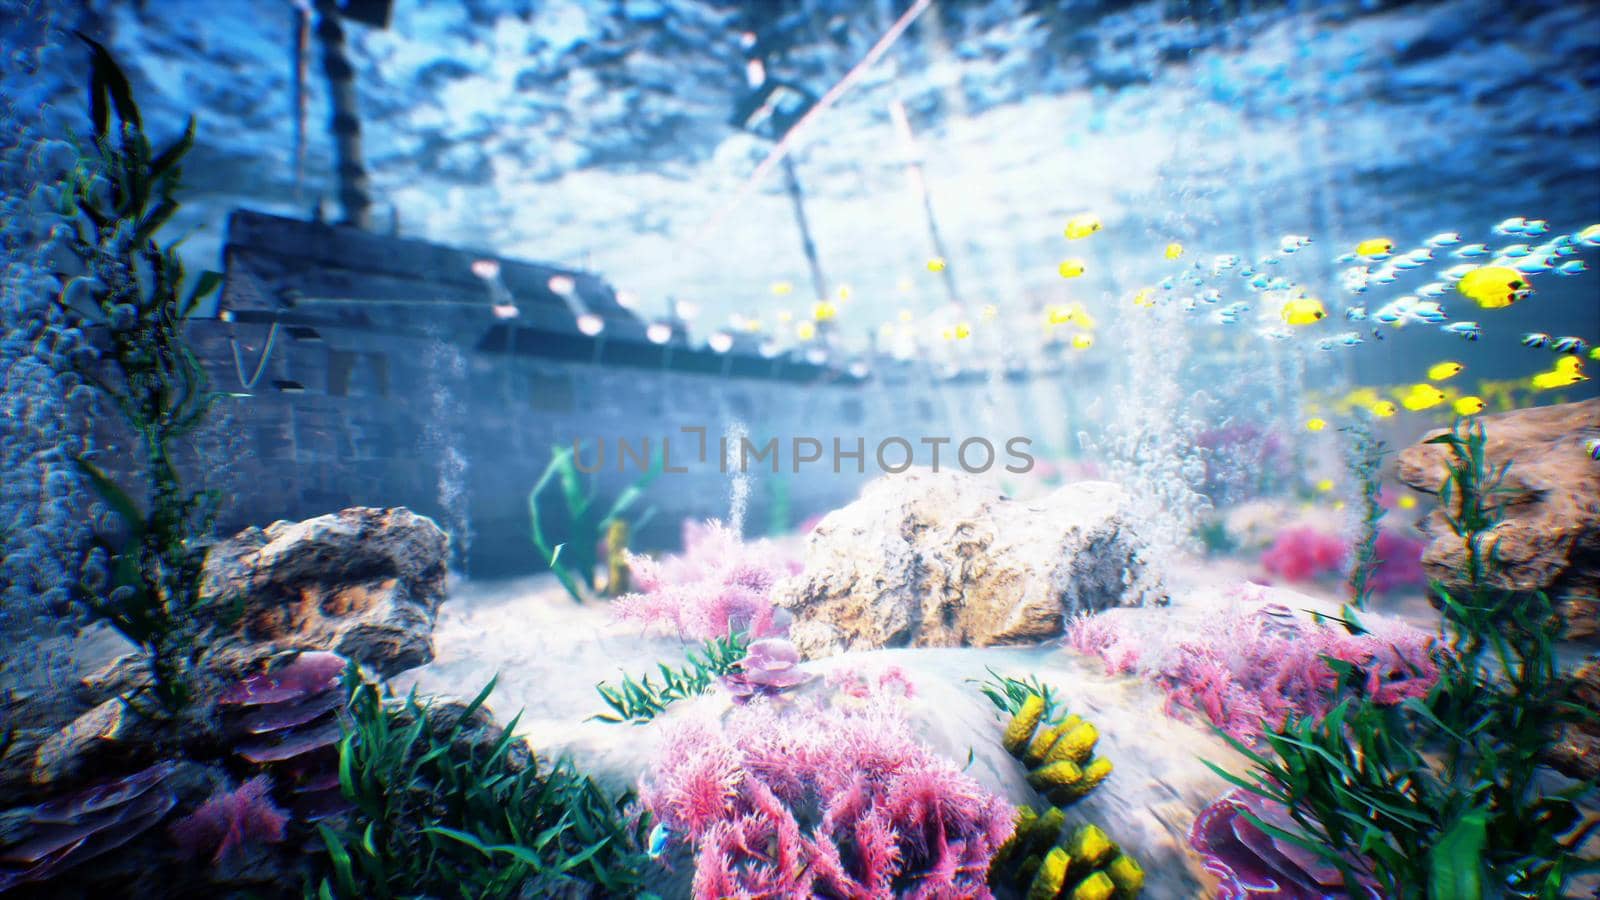 Underwater ocean waves and pirate ship 3D rendering by designprojects